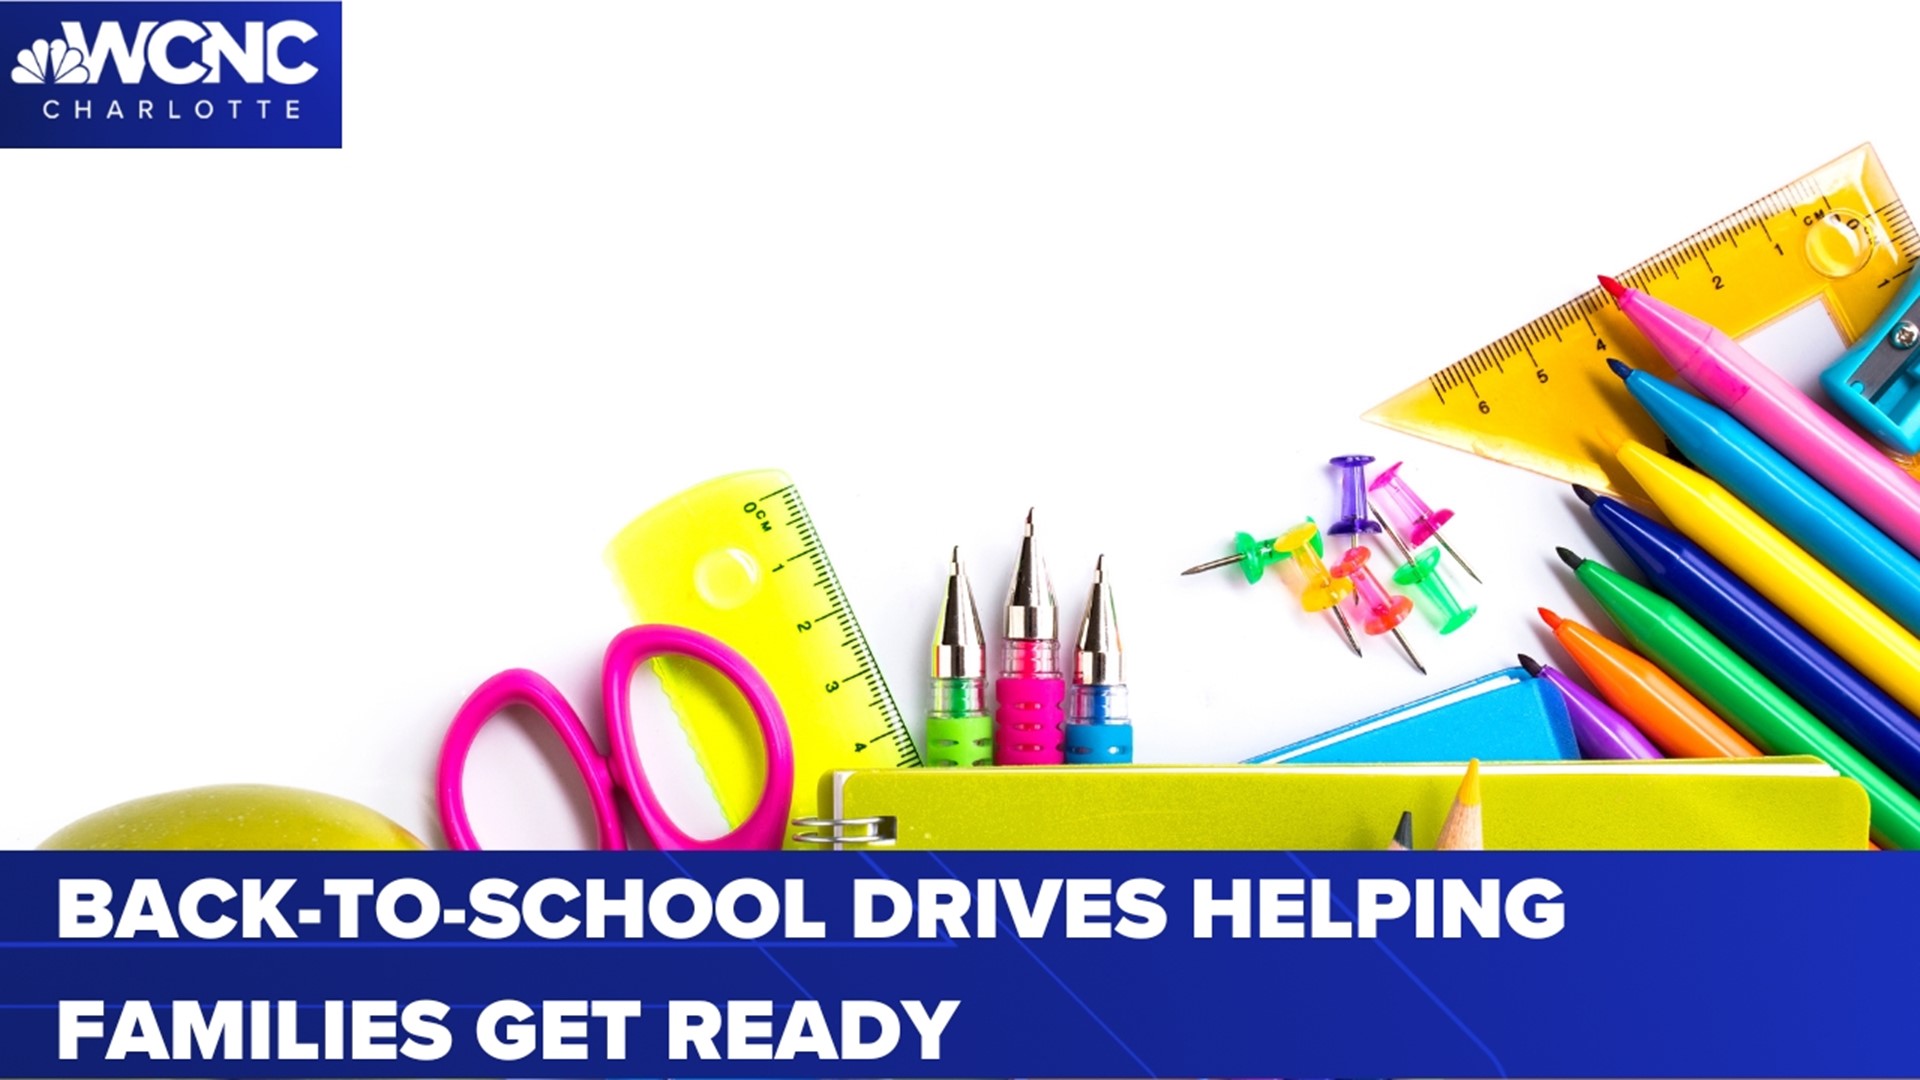 Several community groups kicked off back-to-school events throughout the Charlotte area to help families get ready for school.